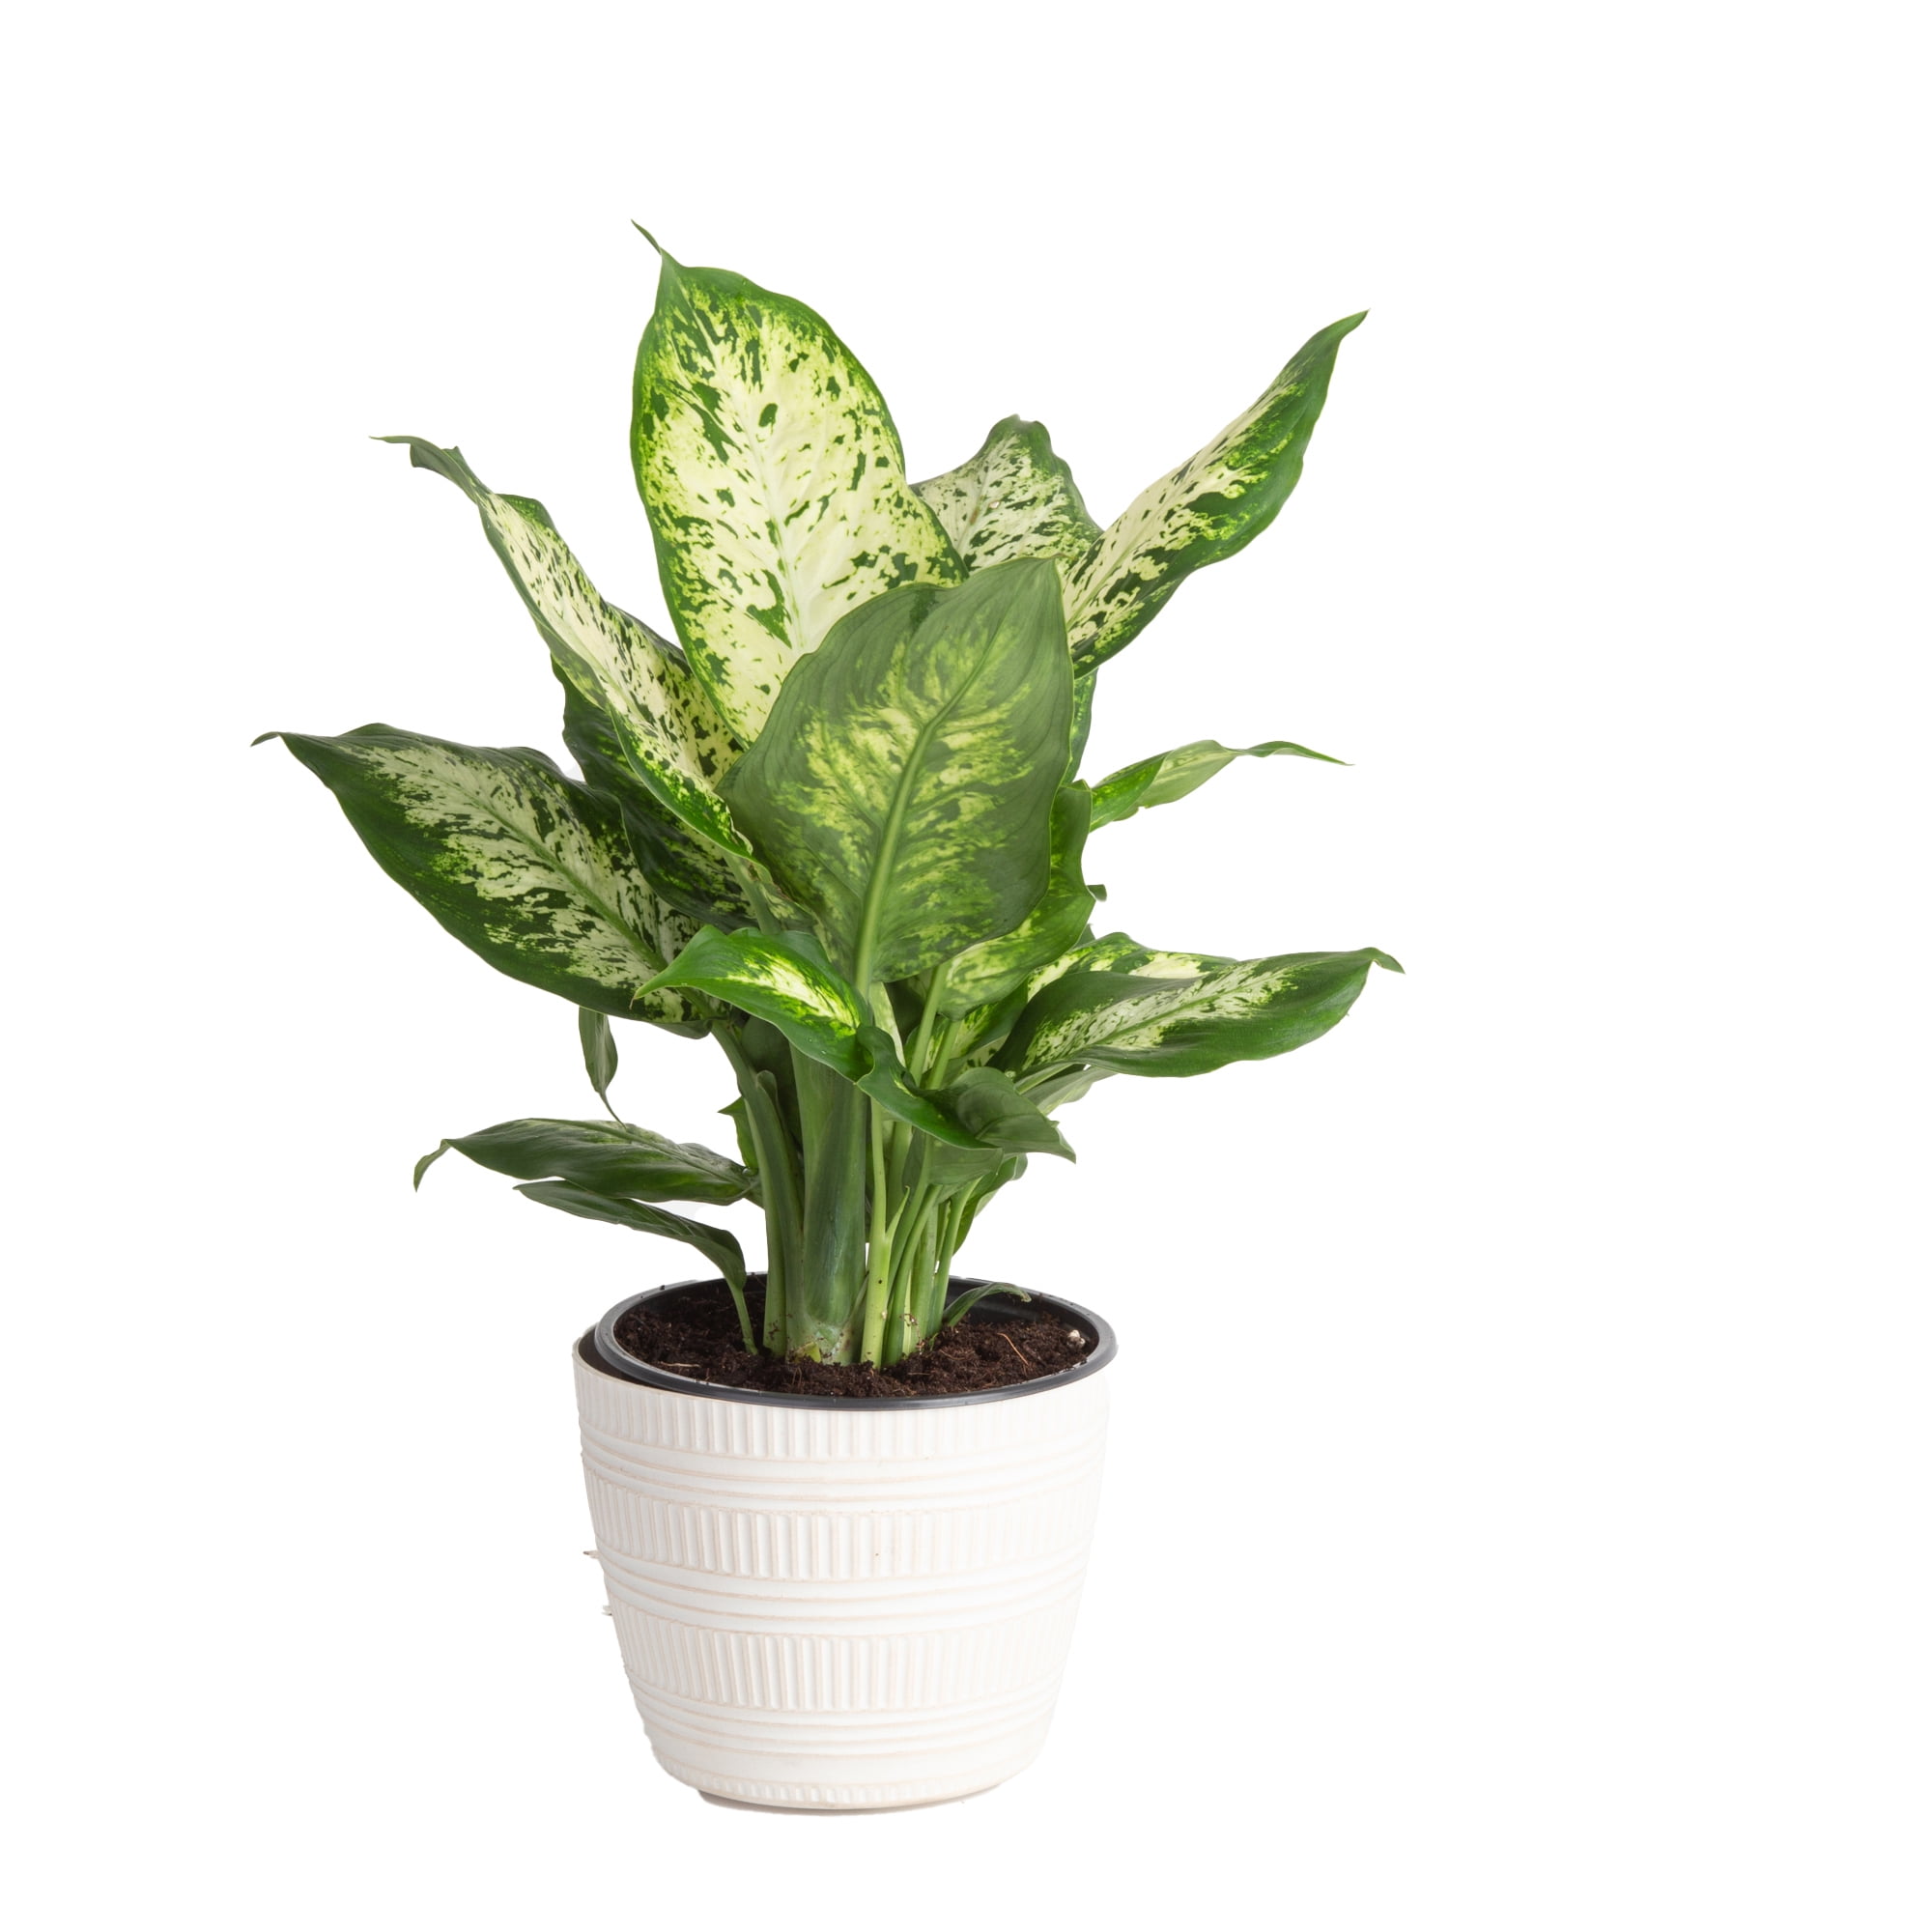 Plants with Benefits Live Green Dieffenbachia Plant in 10in. Grower Pot